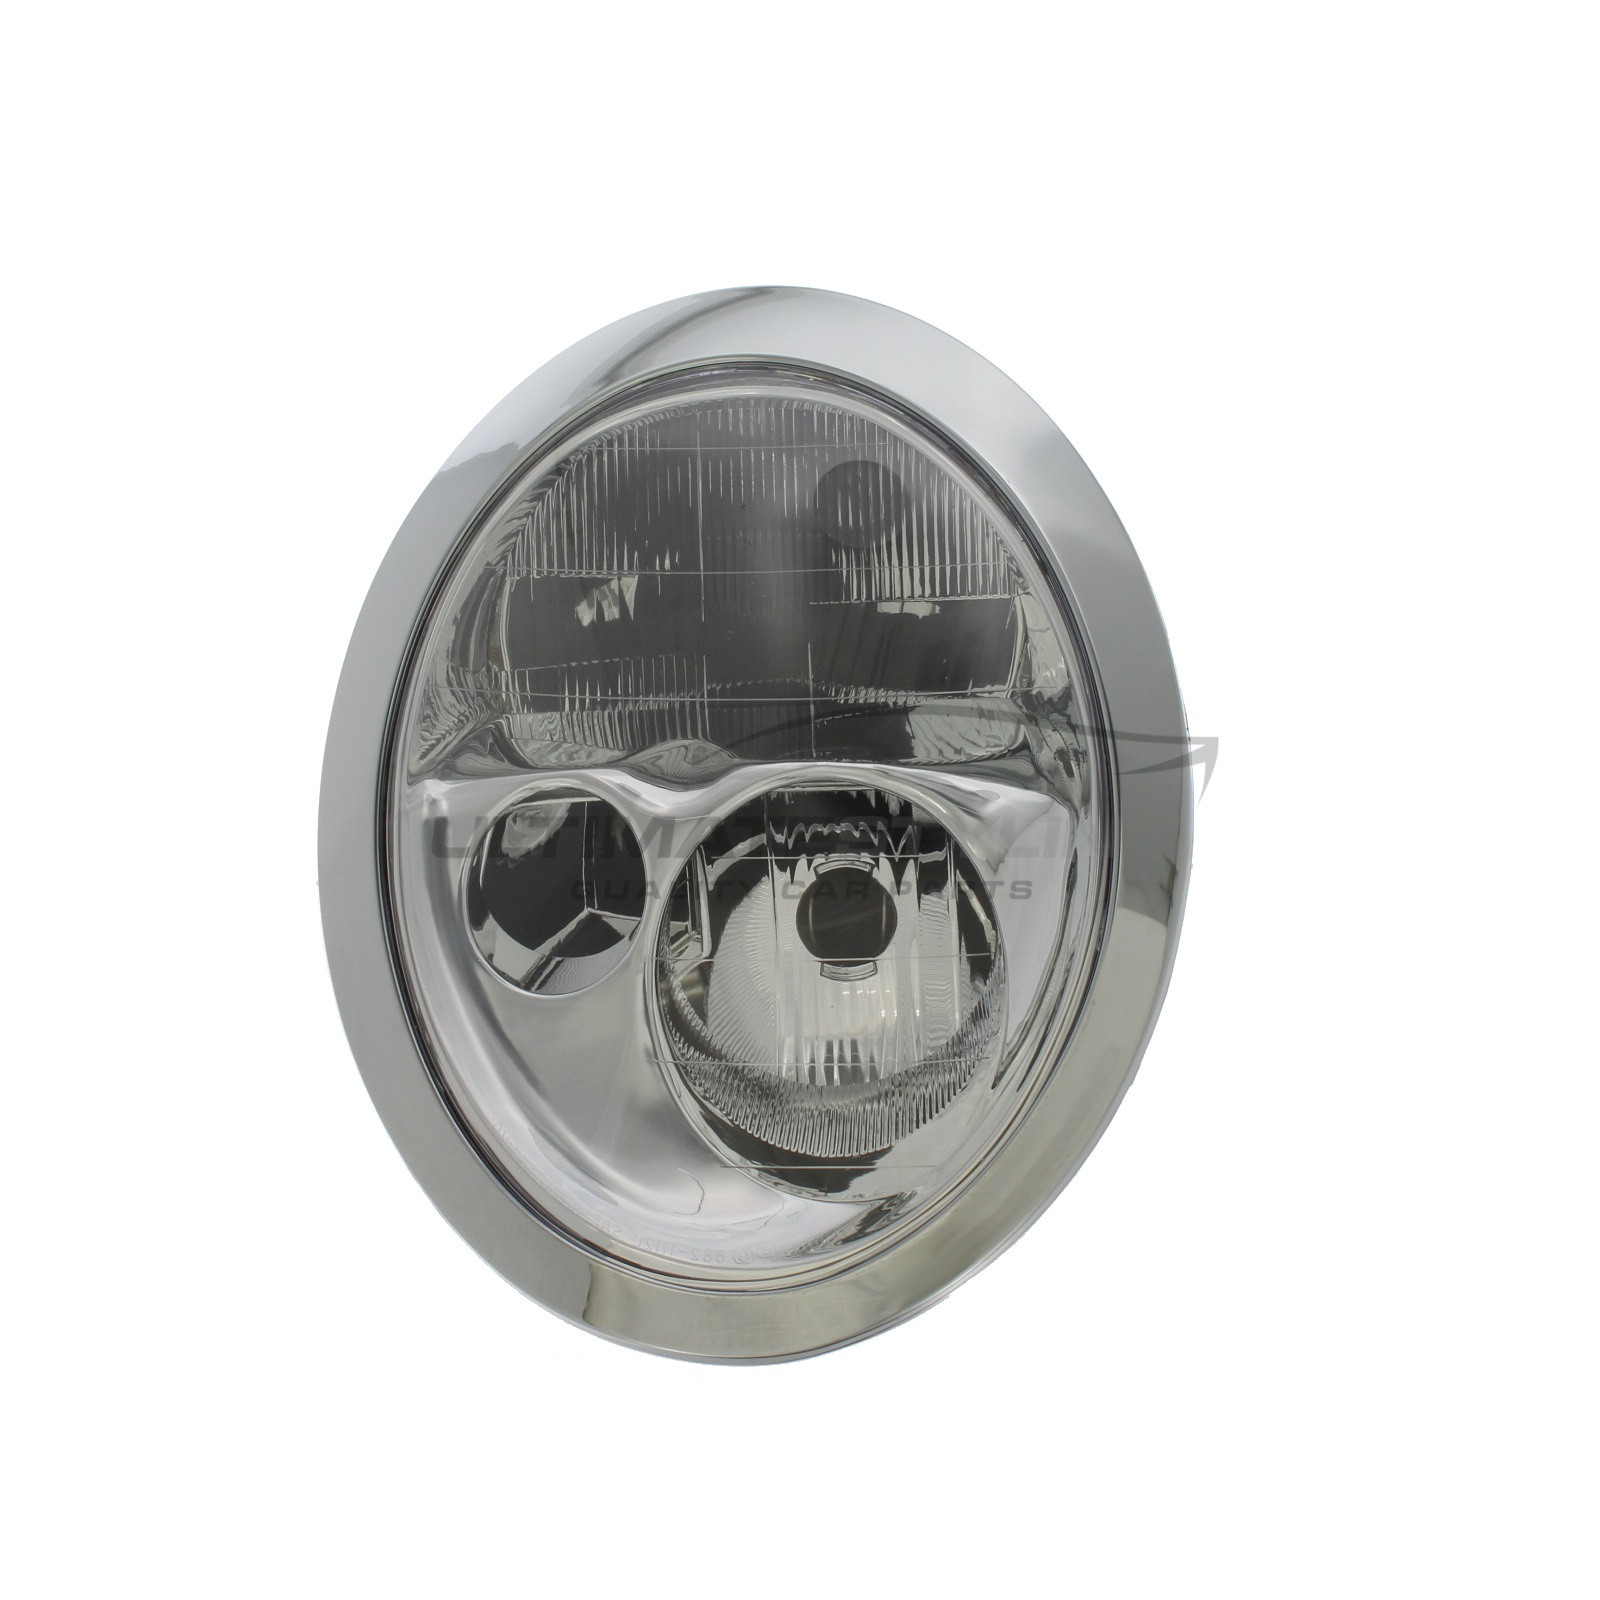 Mini 2001-2004 Halogen, Electric With Motor, Chrome Headlight / Headlamp Including Clear Indicator Drivers Side (RH)